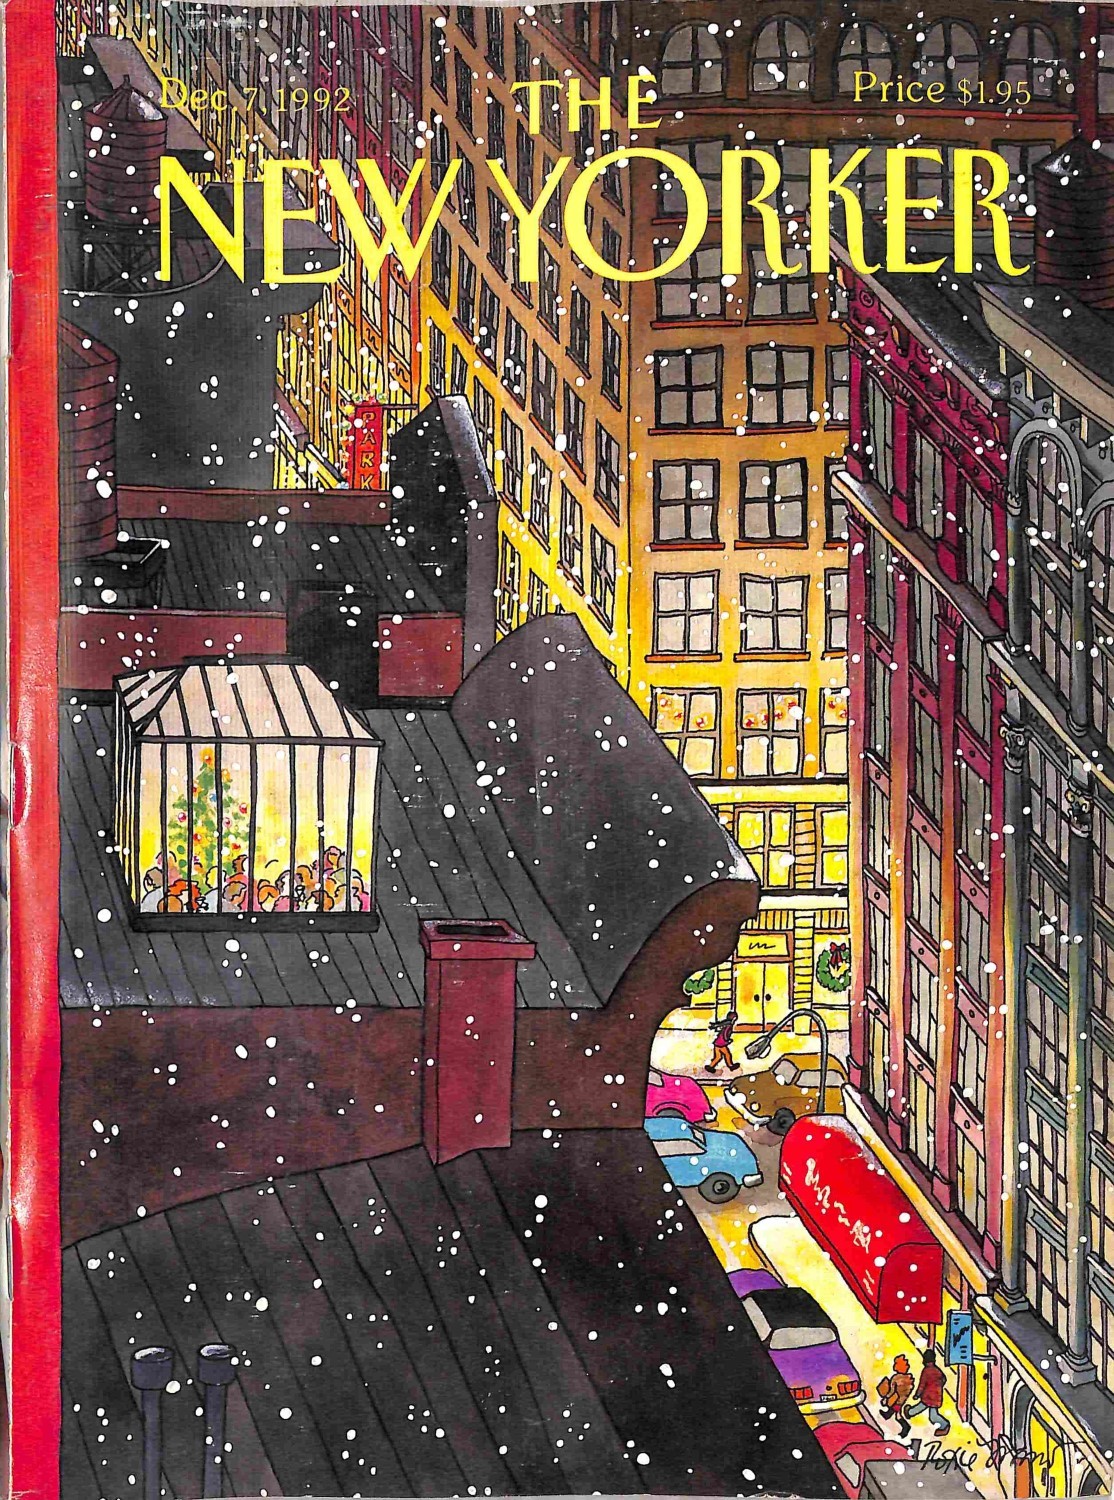 The New Yorker, December 7 1992 - Magazine Back Issues